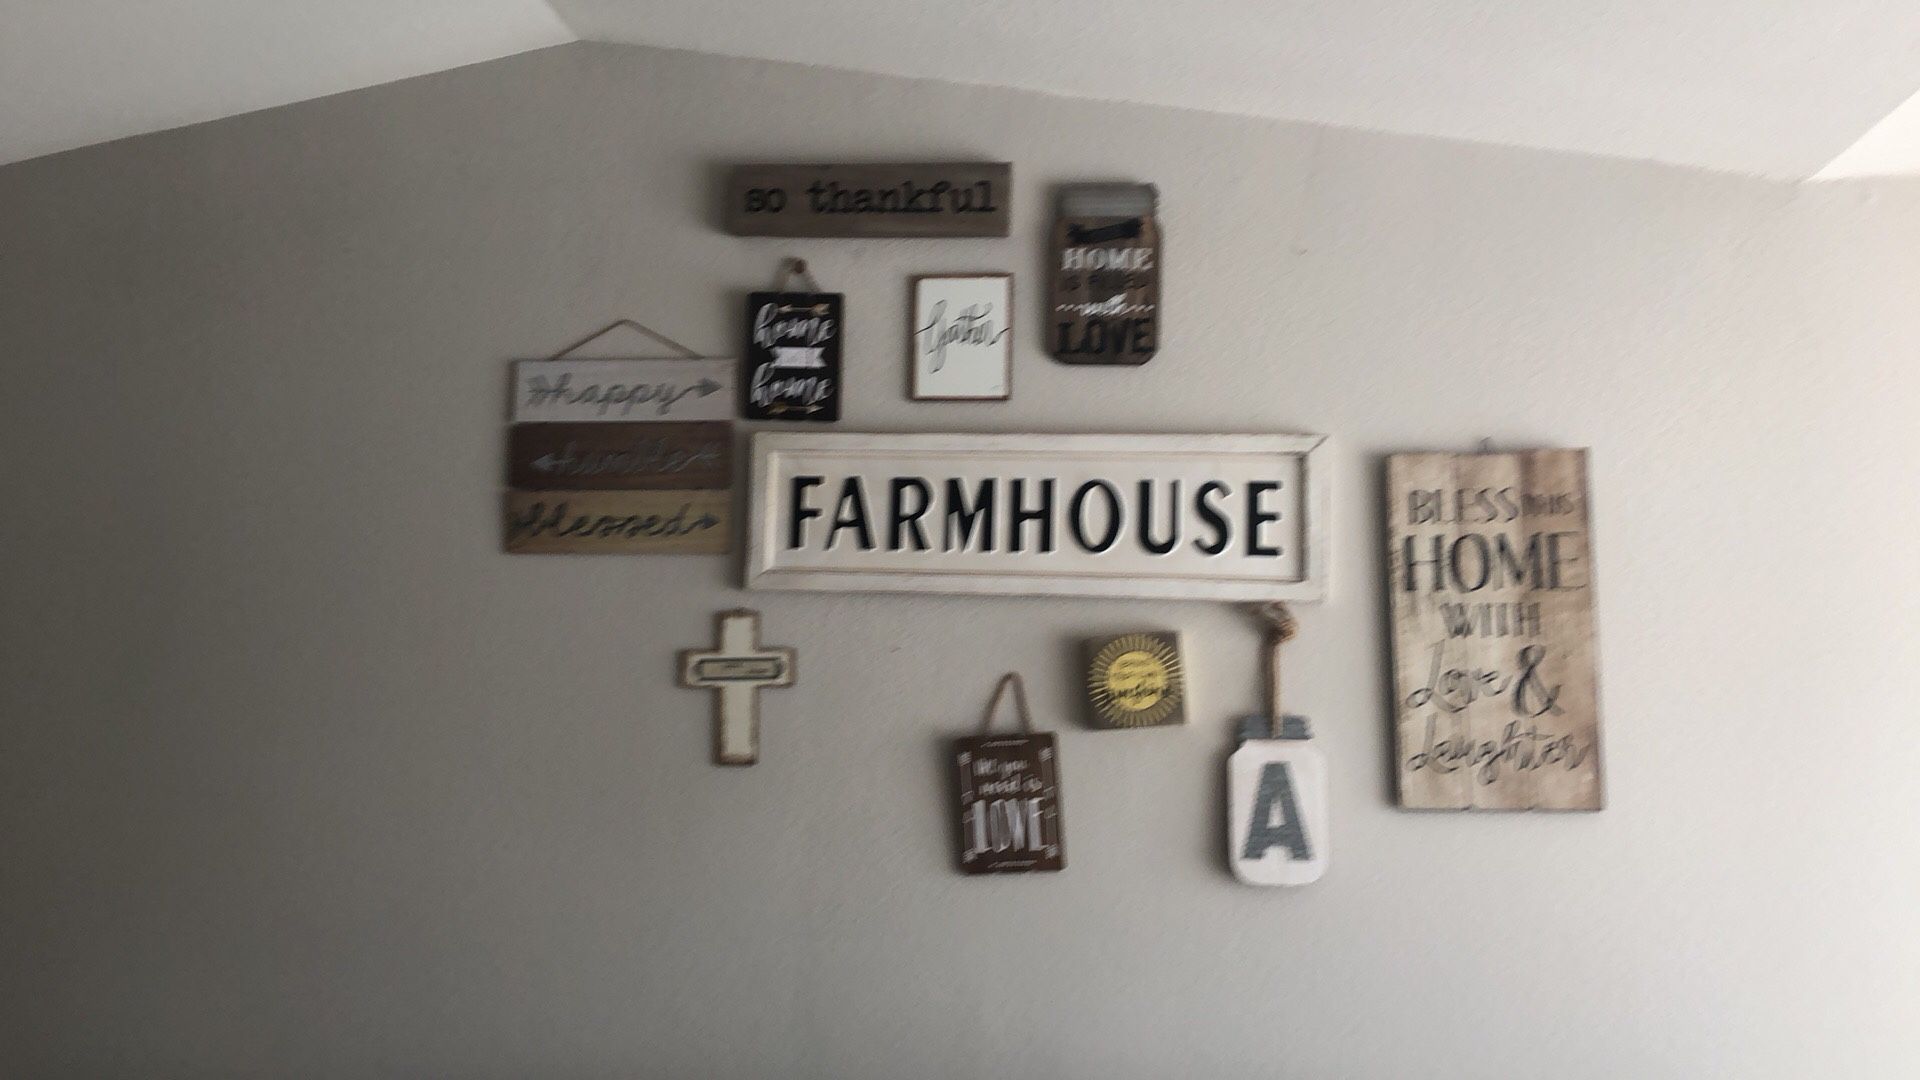 All wall hanging decor